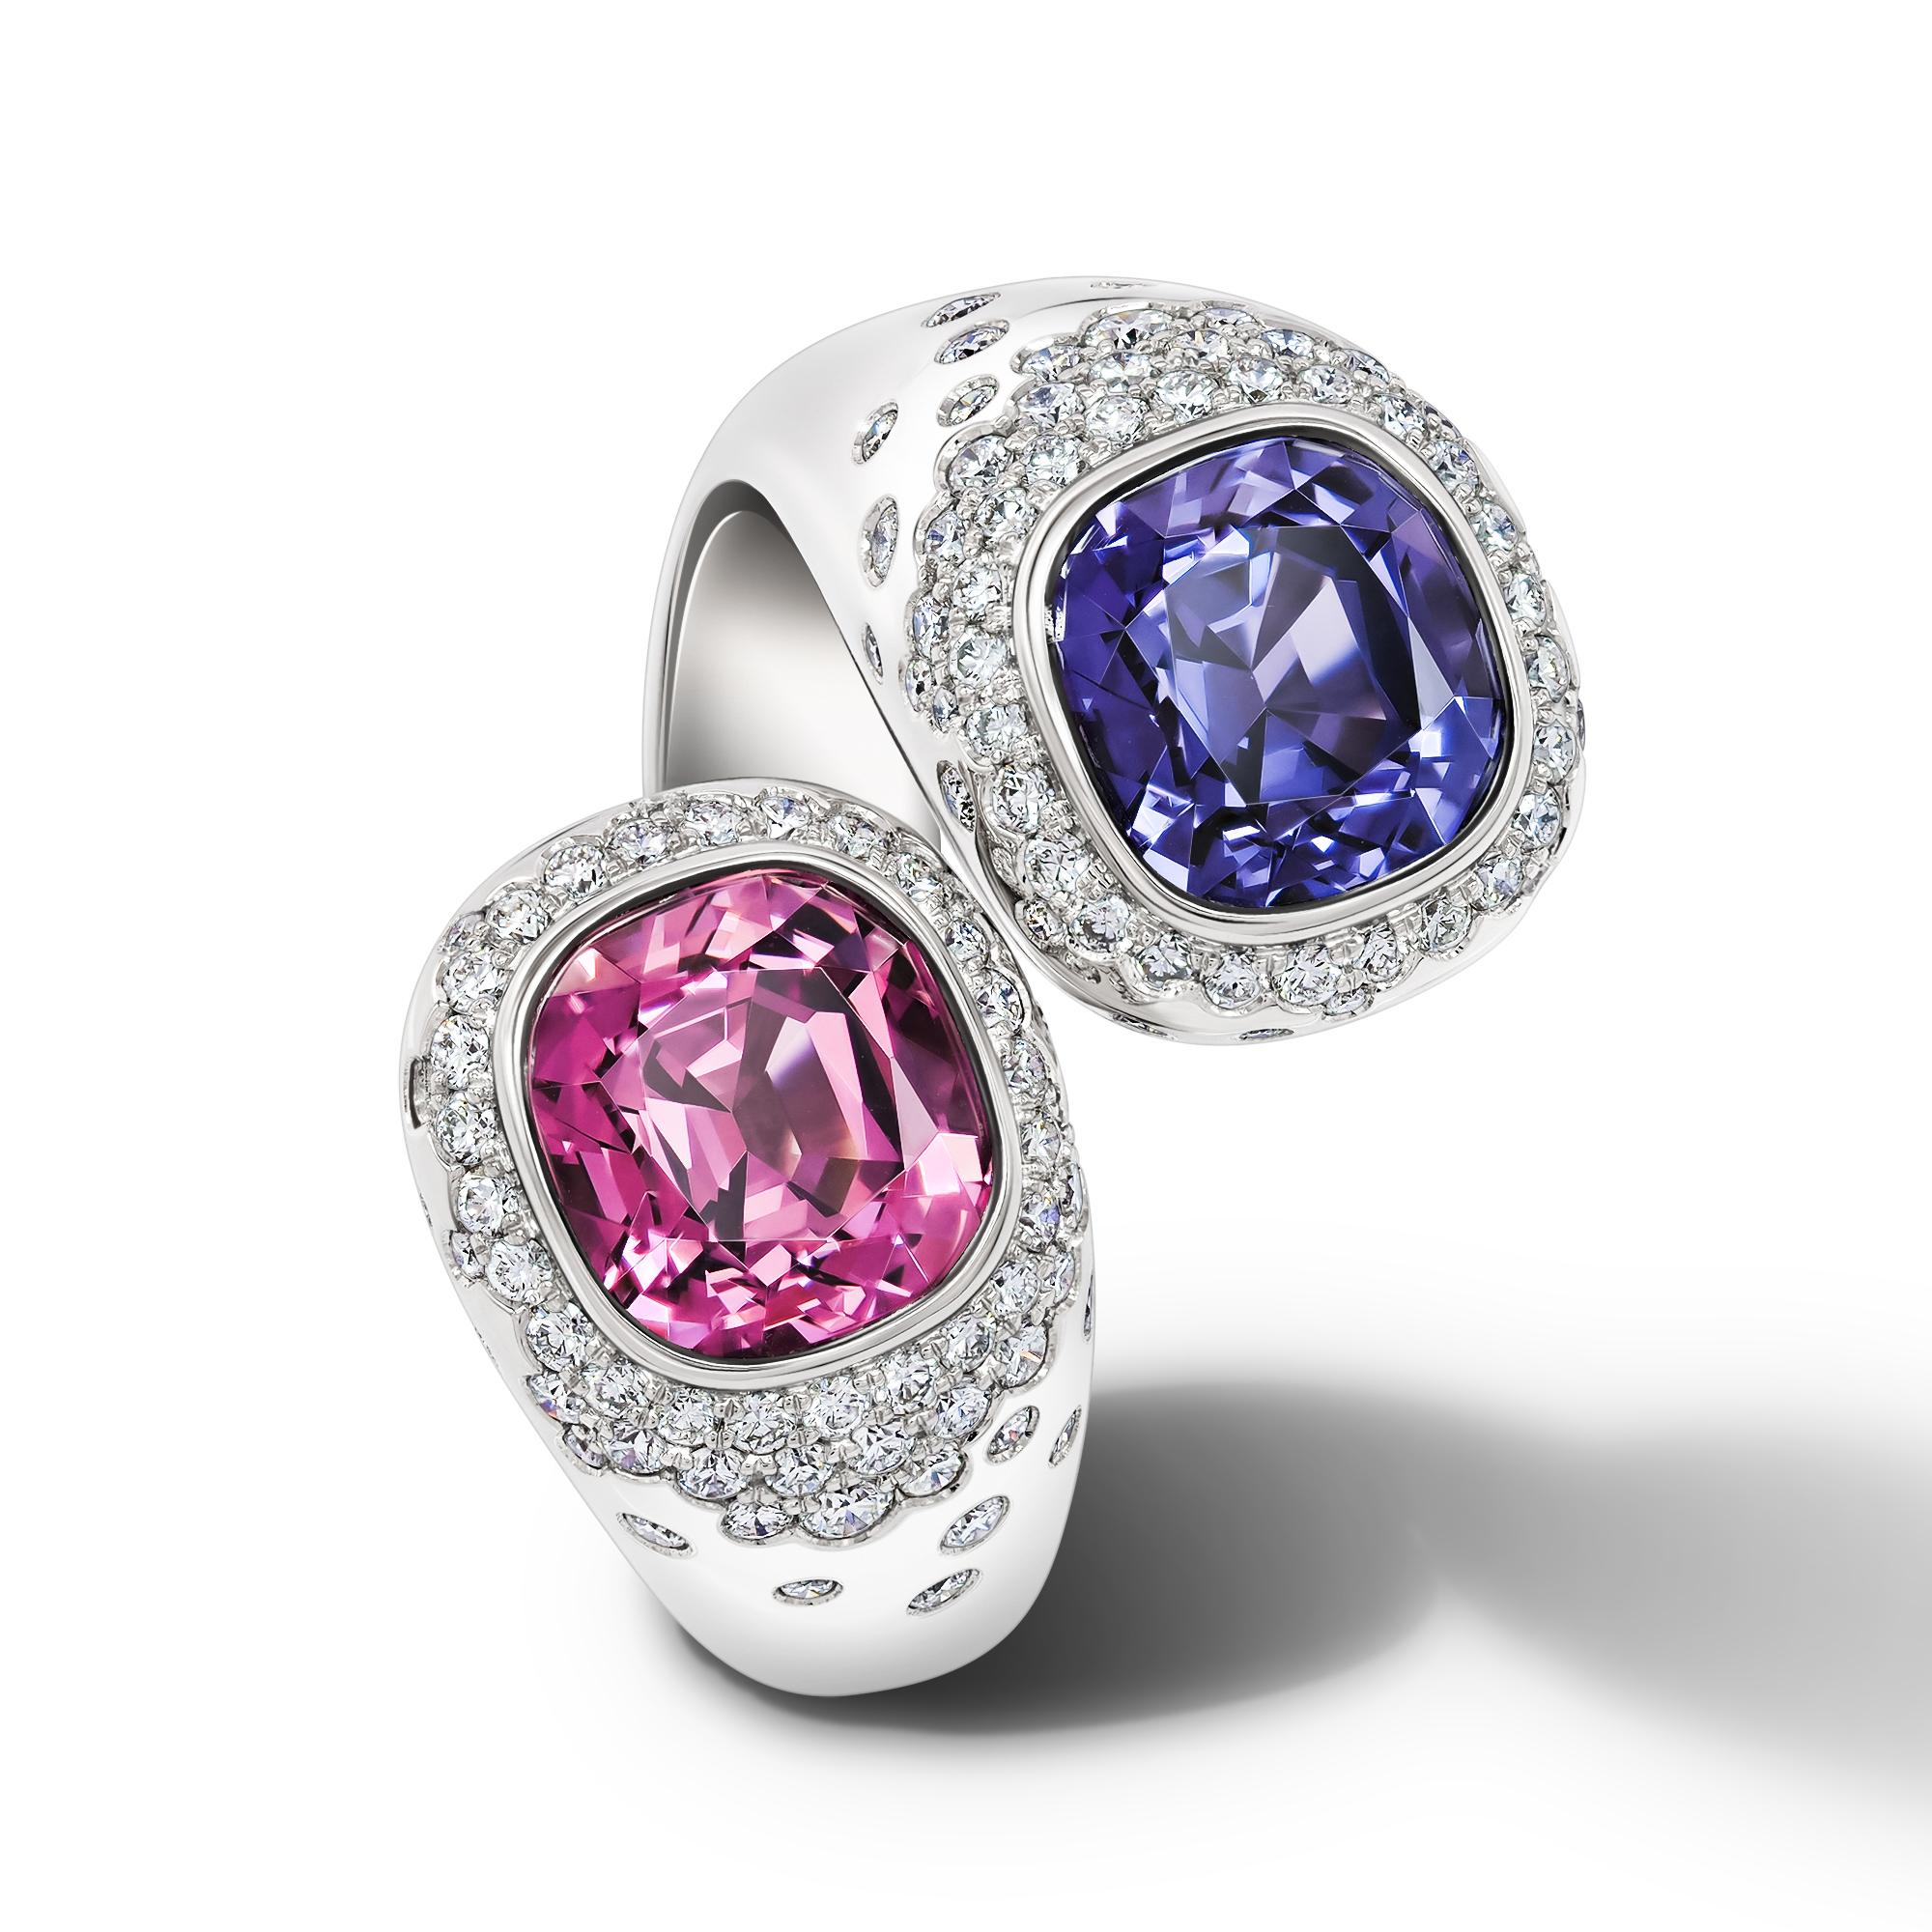 Rendevous Blue and Pink Spinel Ring 
•	18K White gold.  
•	Violet spinel in antique cushion cut – total carat weight 2.46. 
•	Pink Spinel in antique cushion cut – total carat weight 2.46. 
•	Diamonds – 126 pc in round cut – total carat weight